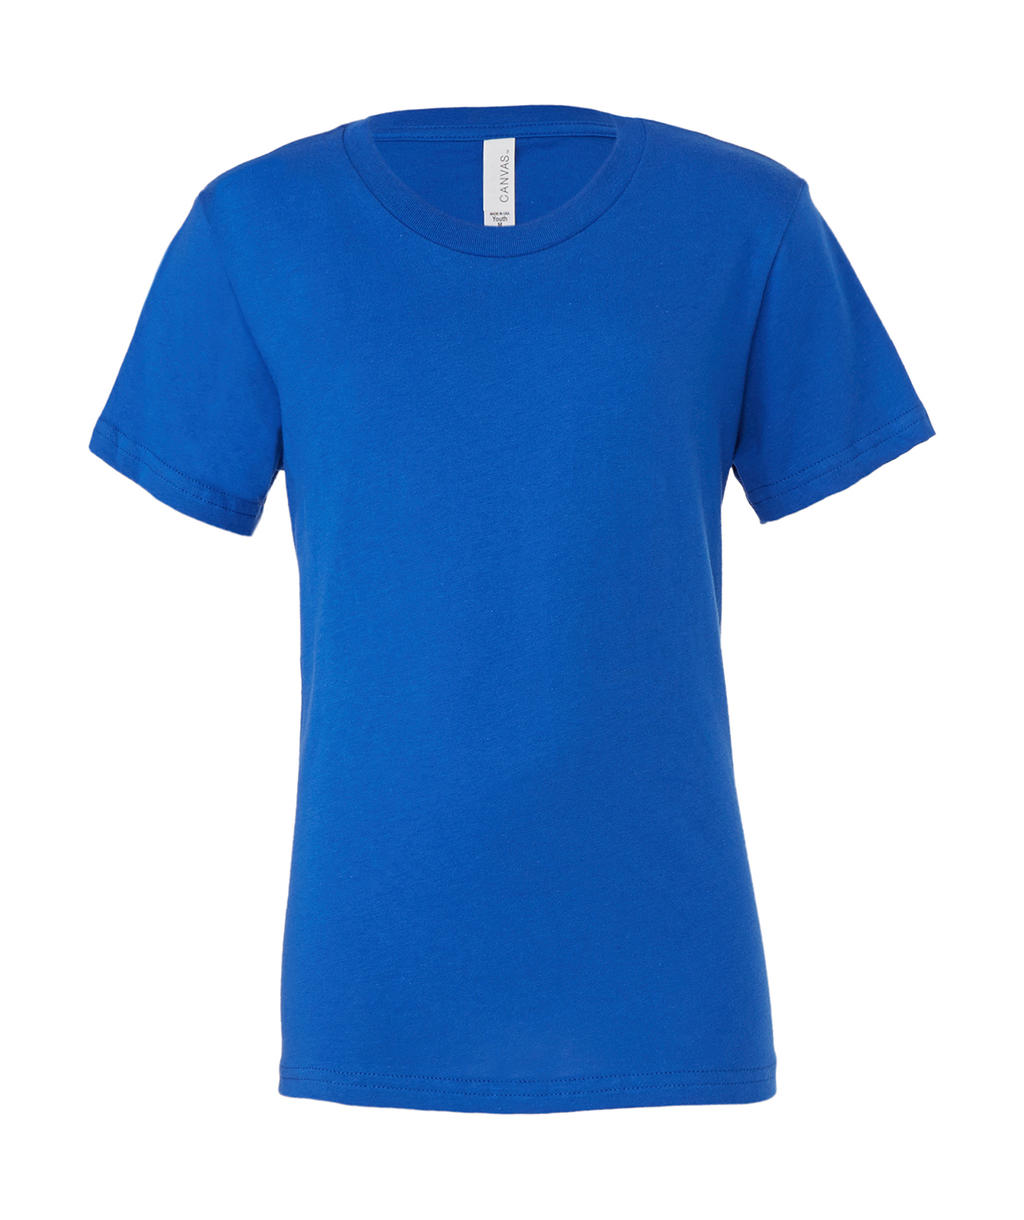  Youth Jersey Short Sleeve Tee in Farbe True Royal